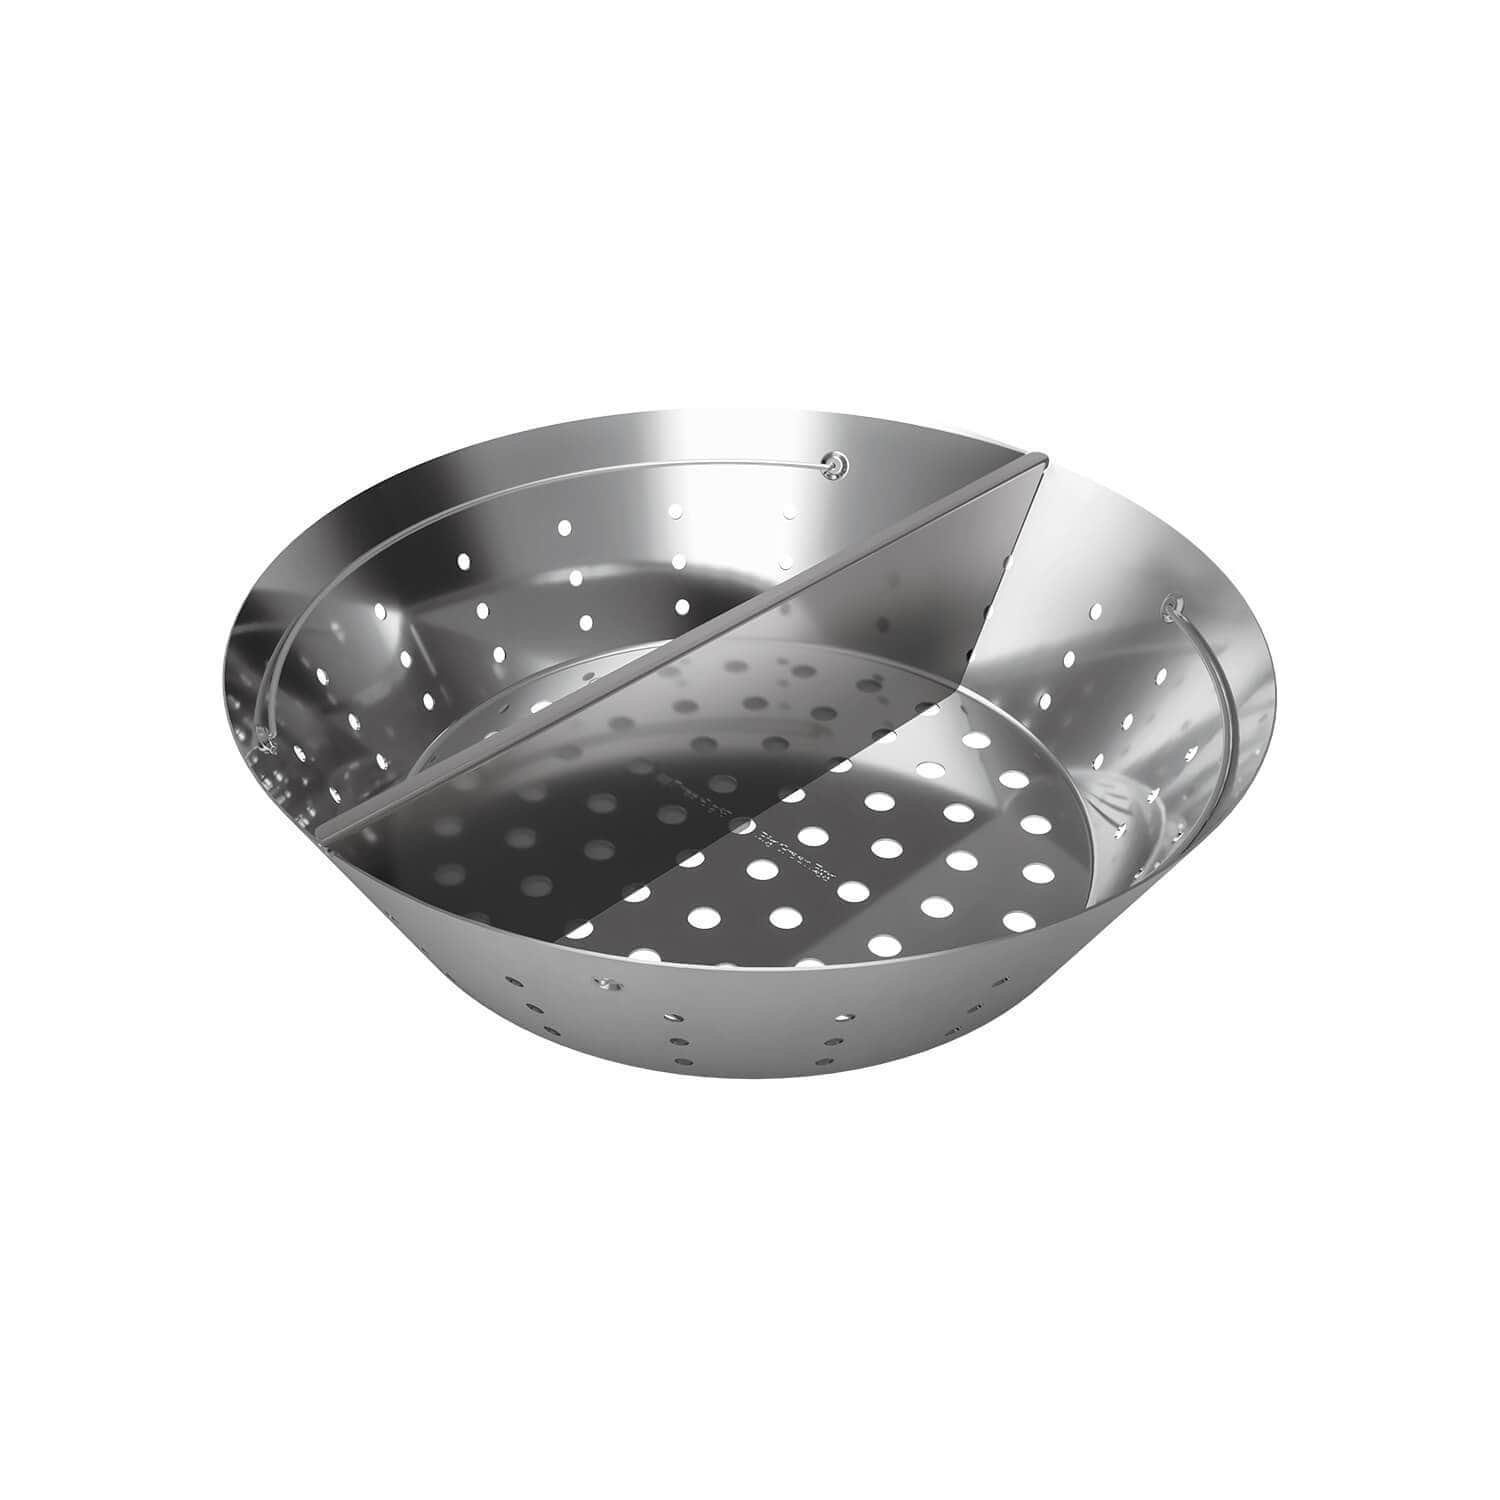 Big Green Egg BBQ Accessories Stainless Steel Fire Bowl - Charcoal Basket